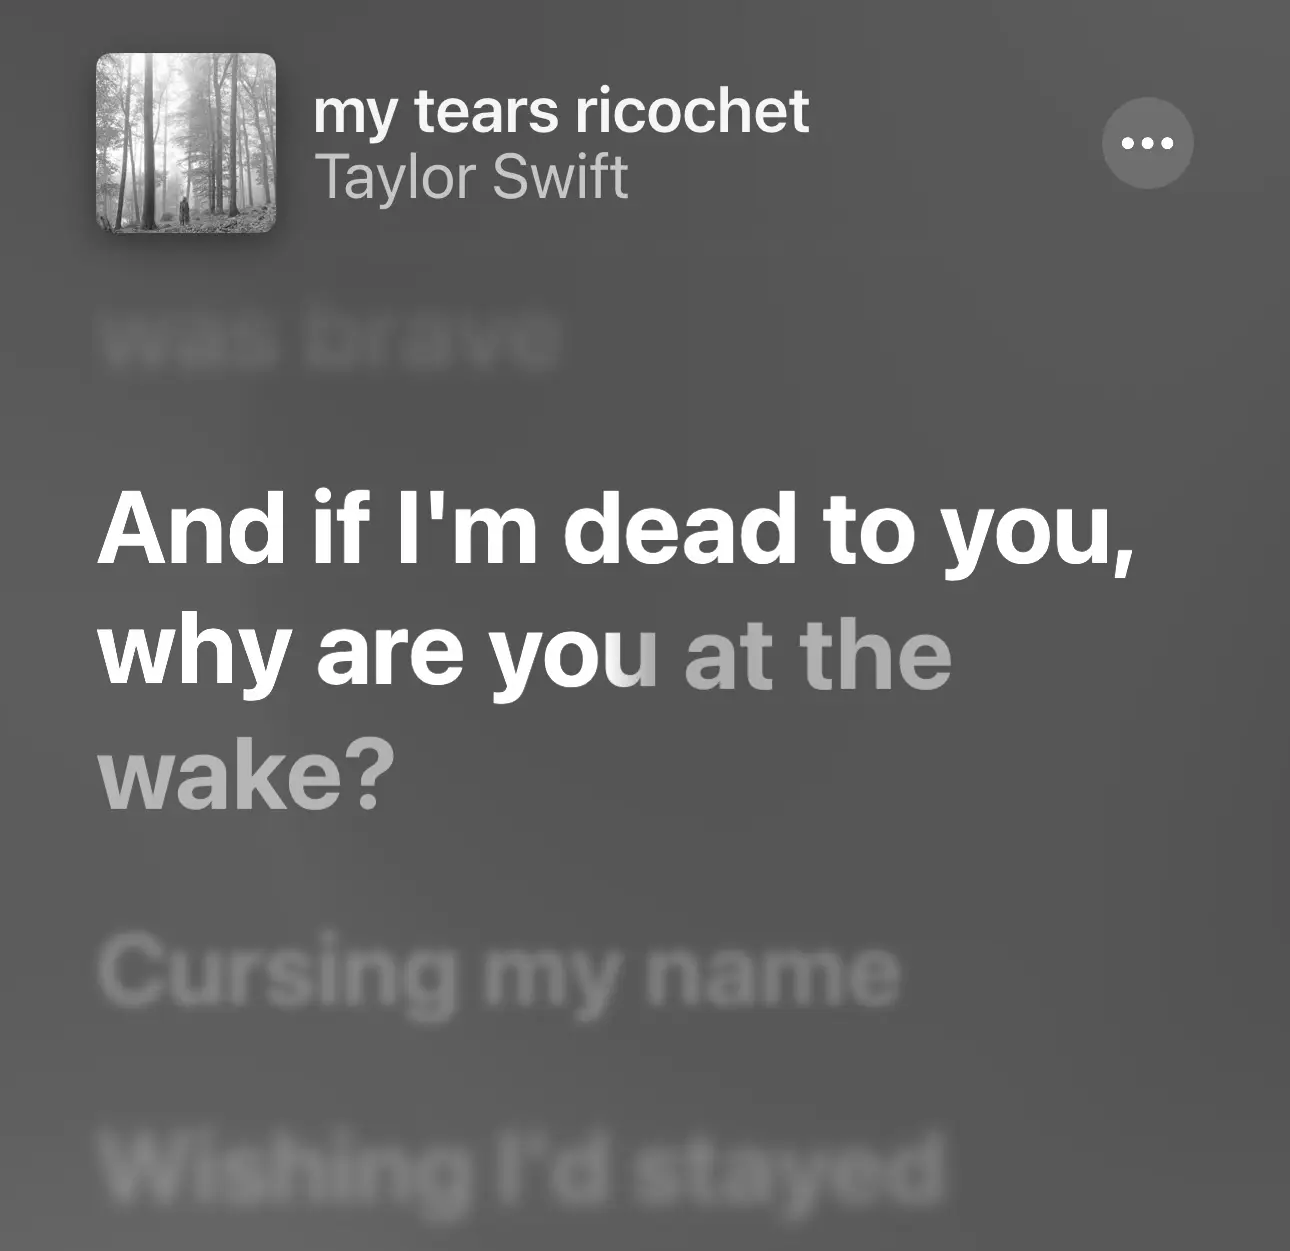 what does  tears ricochet  mean ? in Taylor Swift' s song called